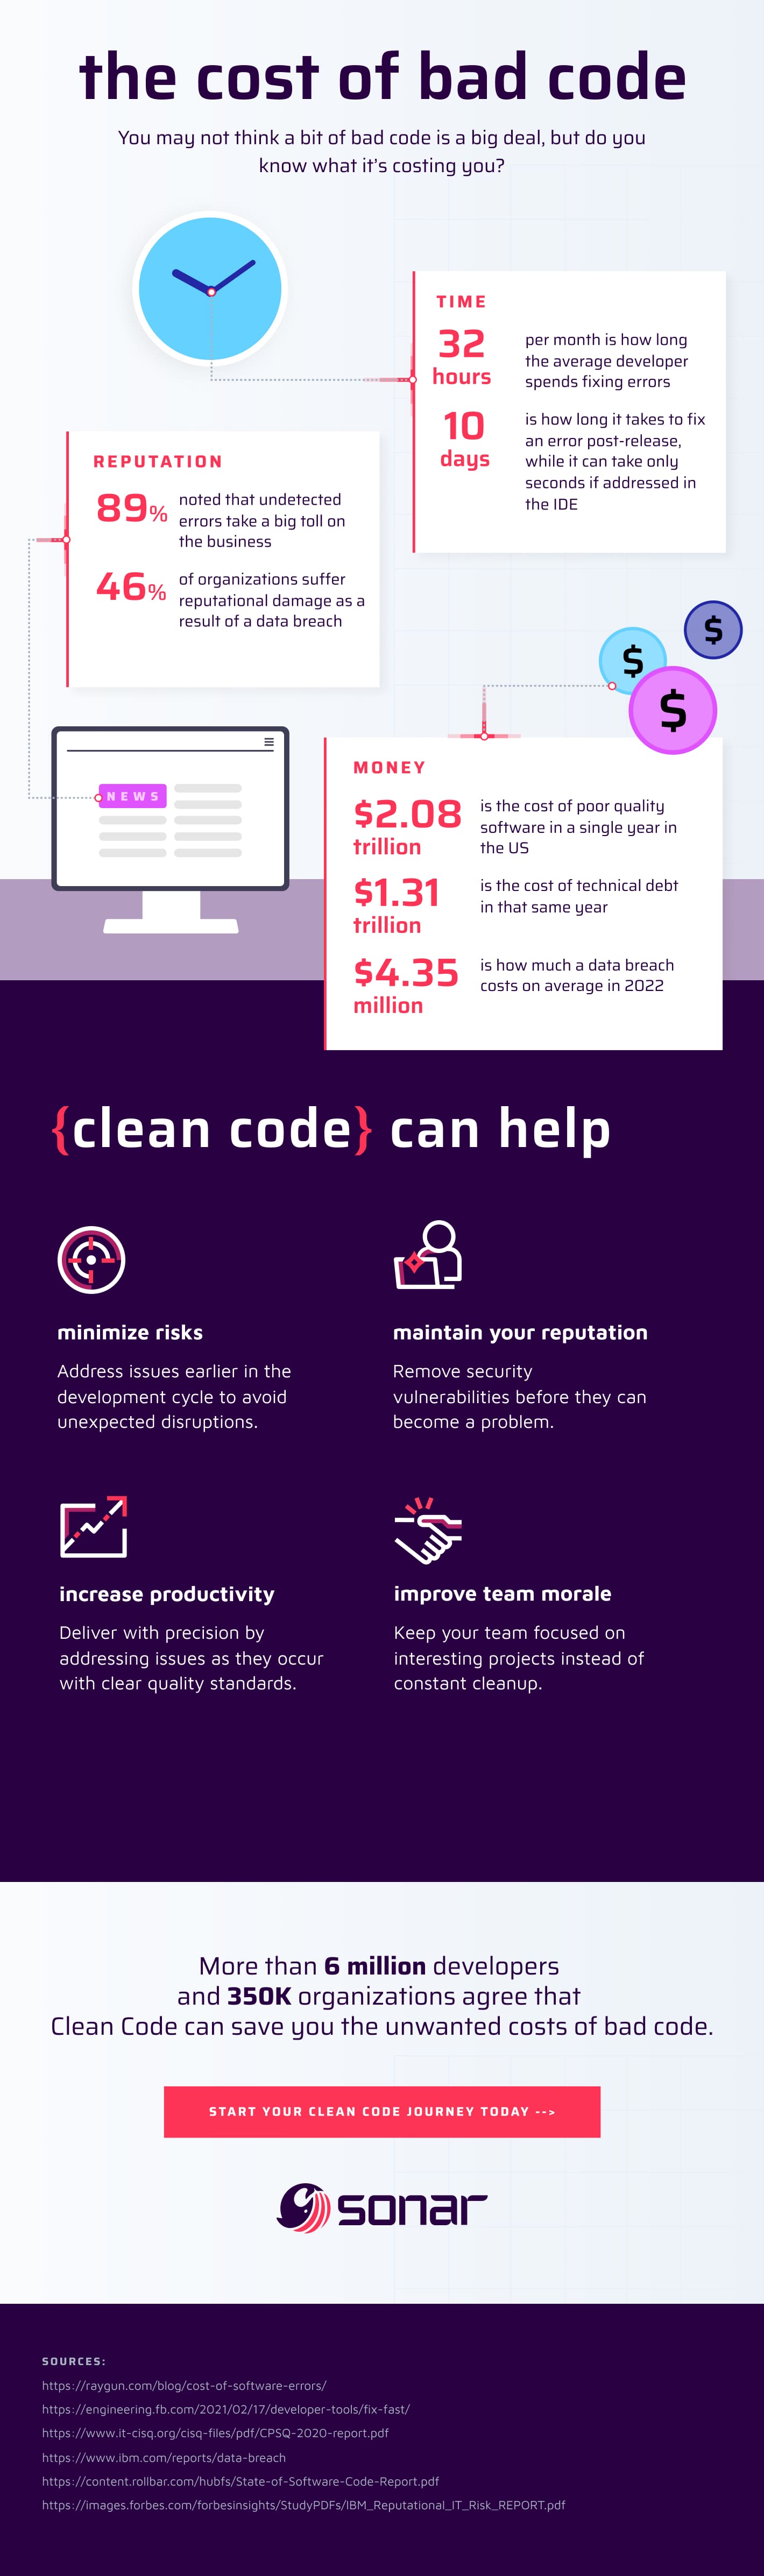 Cost of Bad Code Infographic